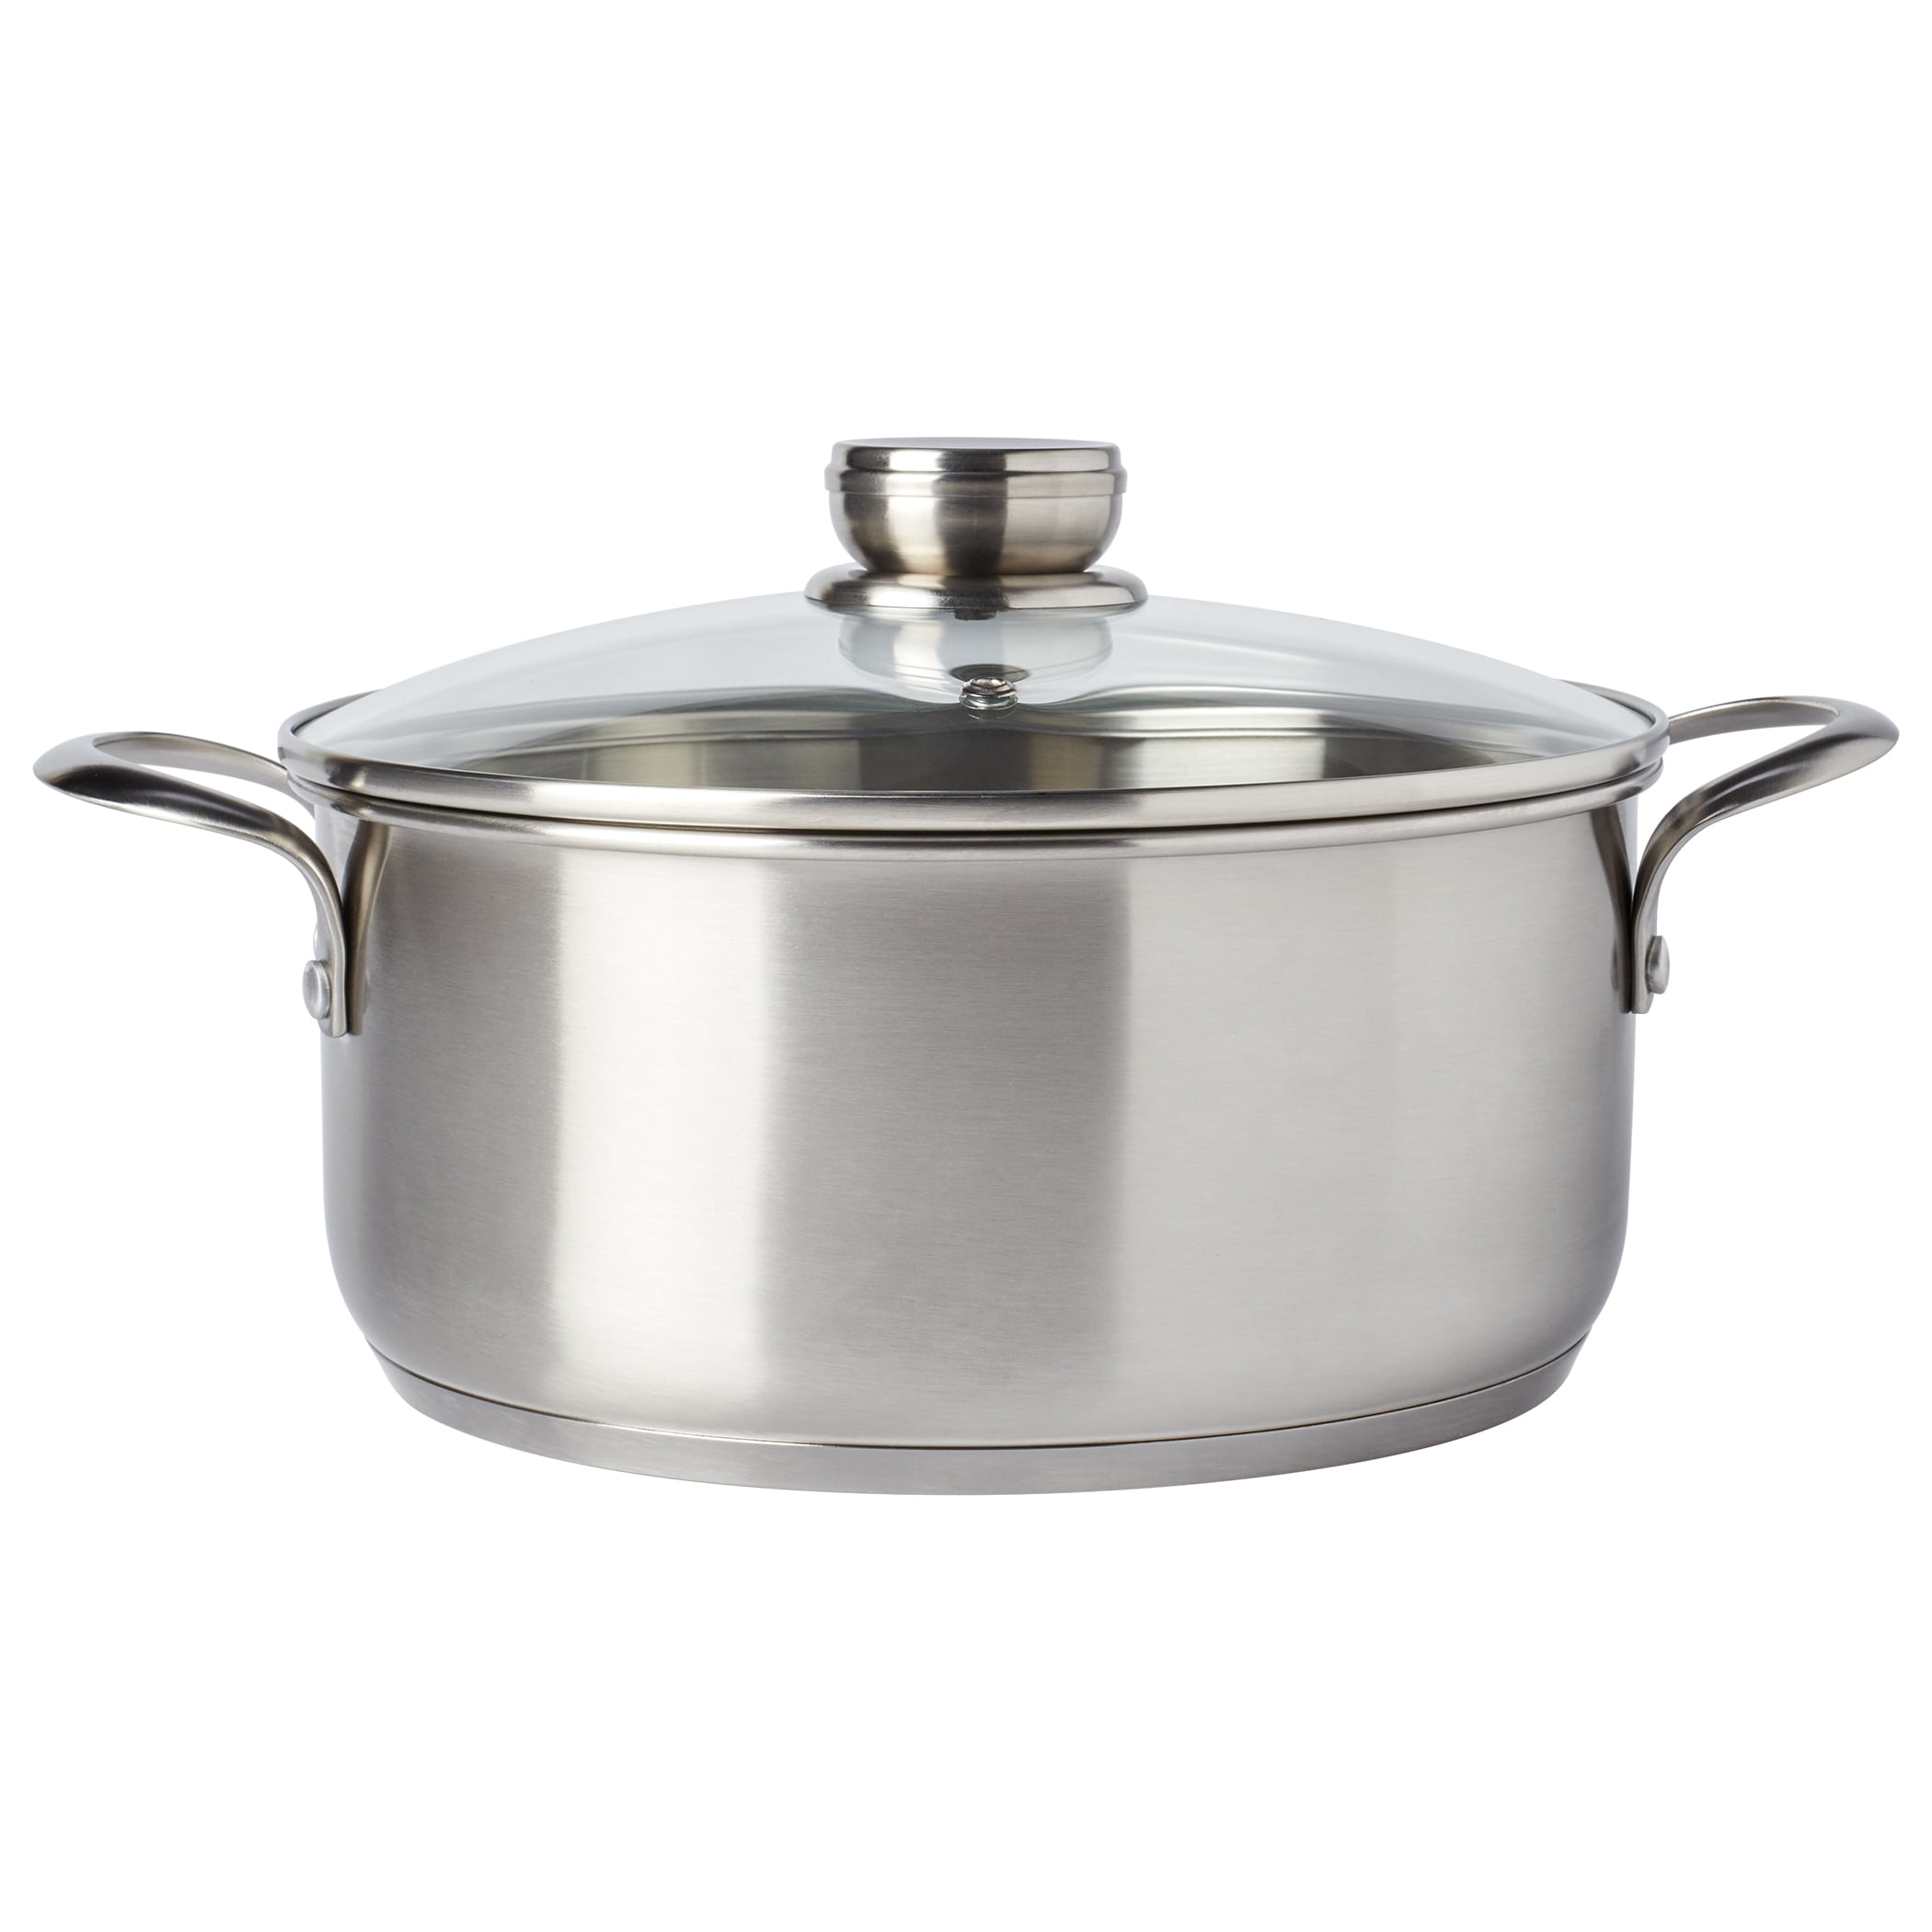 Frigidaire Ready-Cook 5 Quart Dutch Oven Stainless Steel with lid